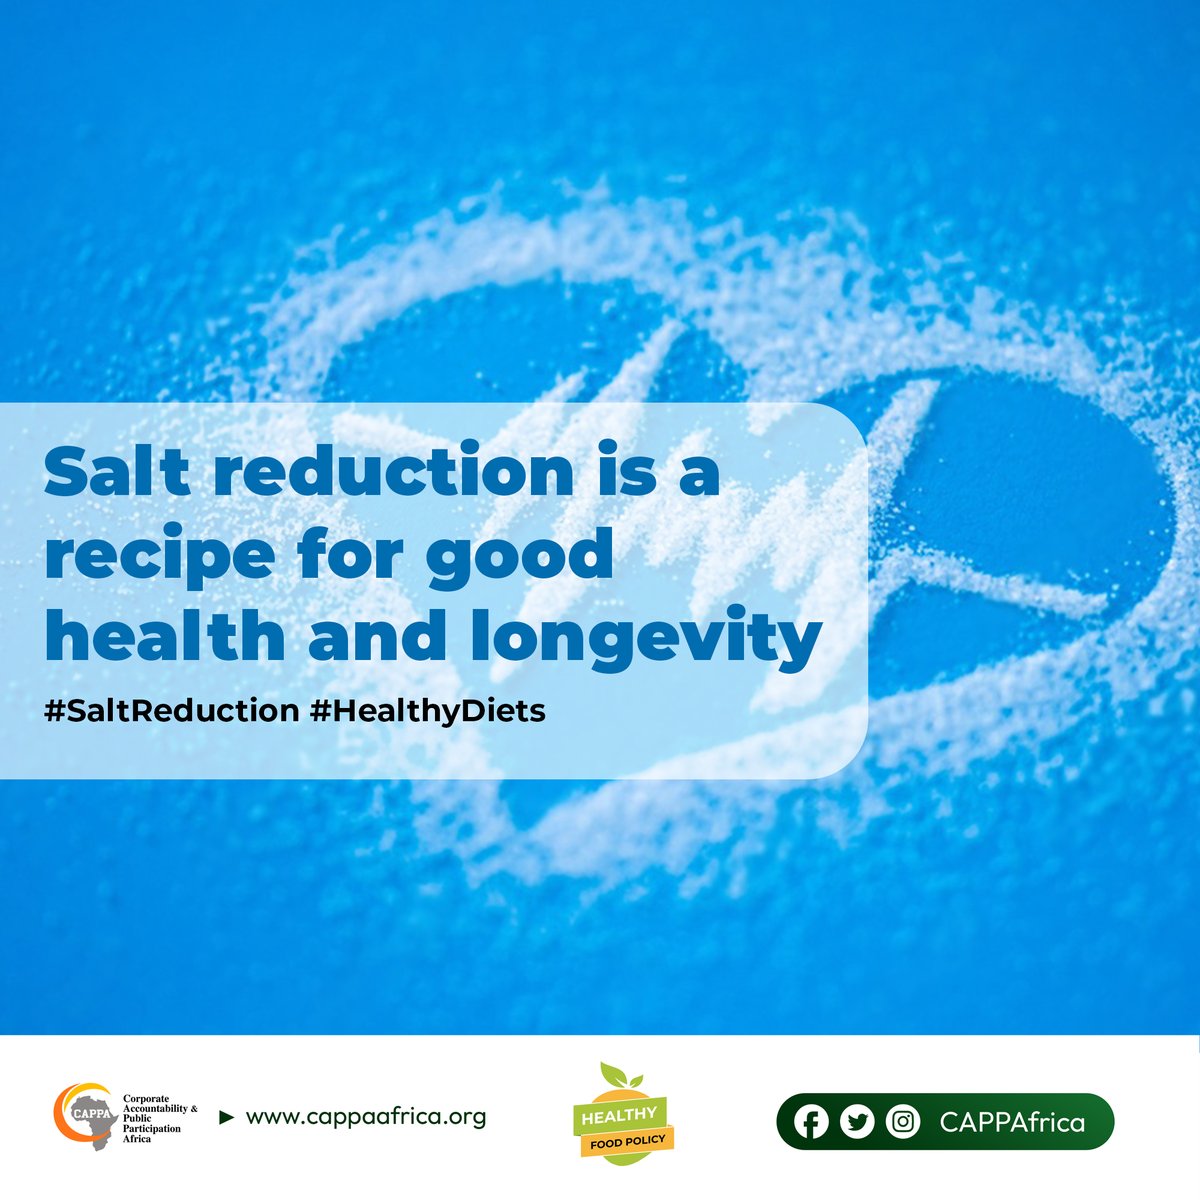 Wishing you a joyful Easter! As we celebrate, let's remember to monitor our salt intake for a healthier lifestyle. #SaltReduction #HealthyDiets